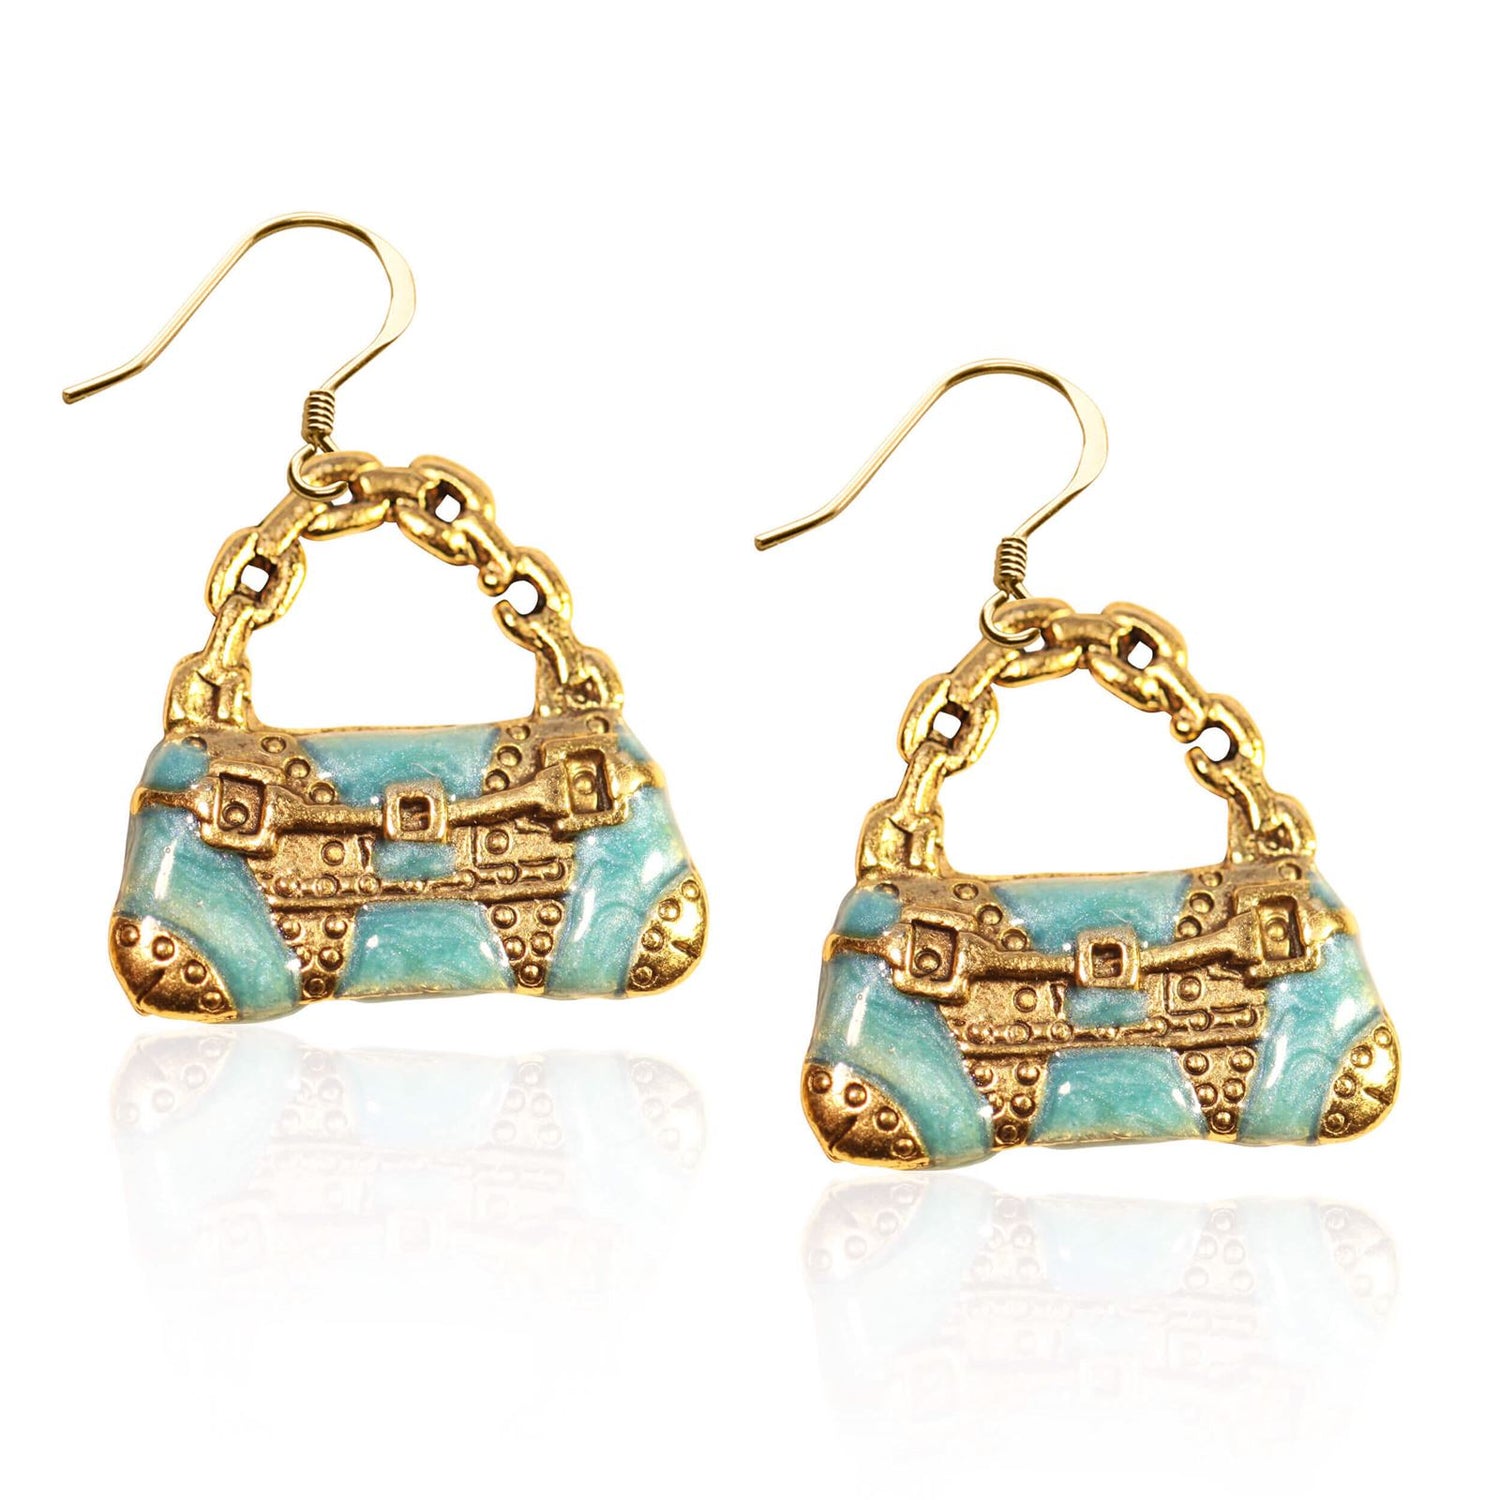 Whimsical Gifts | Retro Purse Charm Earrings in Gold Finish | Hobbies & Special Interests | Fashionista | Jewelry